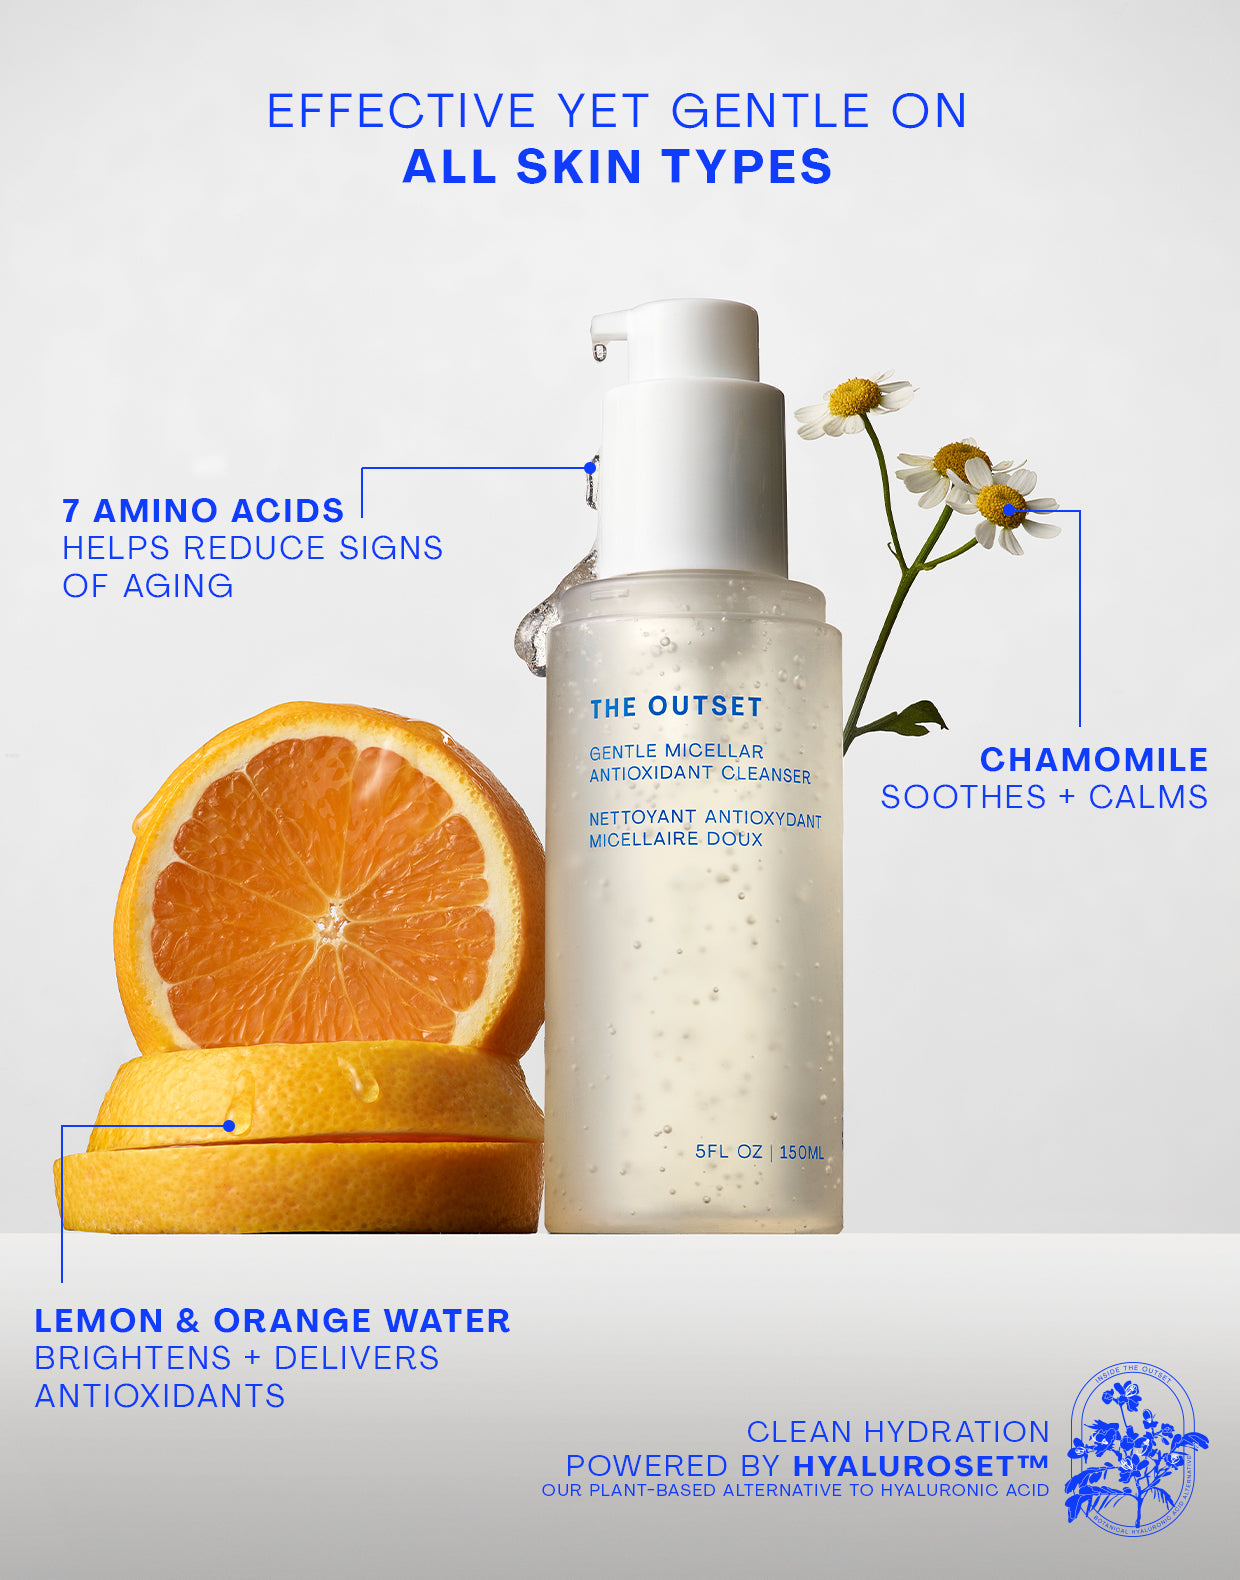 Photo of The Outset cleanser with ingredients; Effective yet gentle on all skin types; 7 amino acids helps reduce signs of aging; chamomile soothes + calms; lemon & orange water brightens + delivers antioxidants; hyaluroset badge with text clean hydration powered by hyaluroset (TM), our plant-based alternative to hyaluronic acid